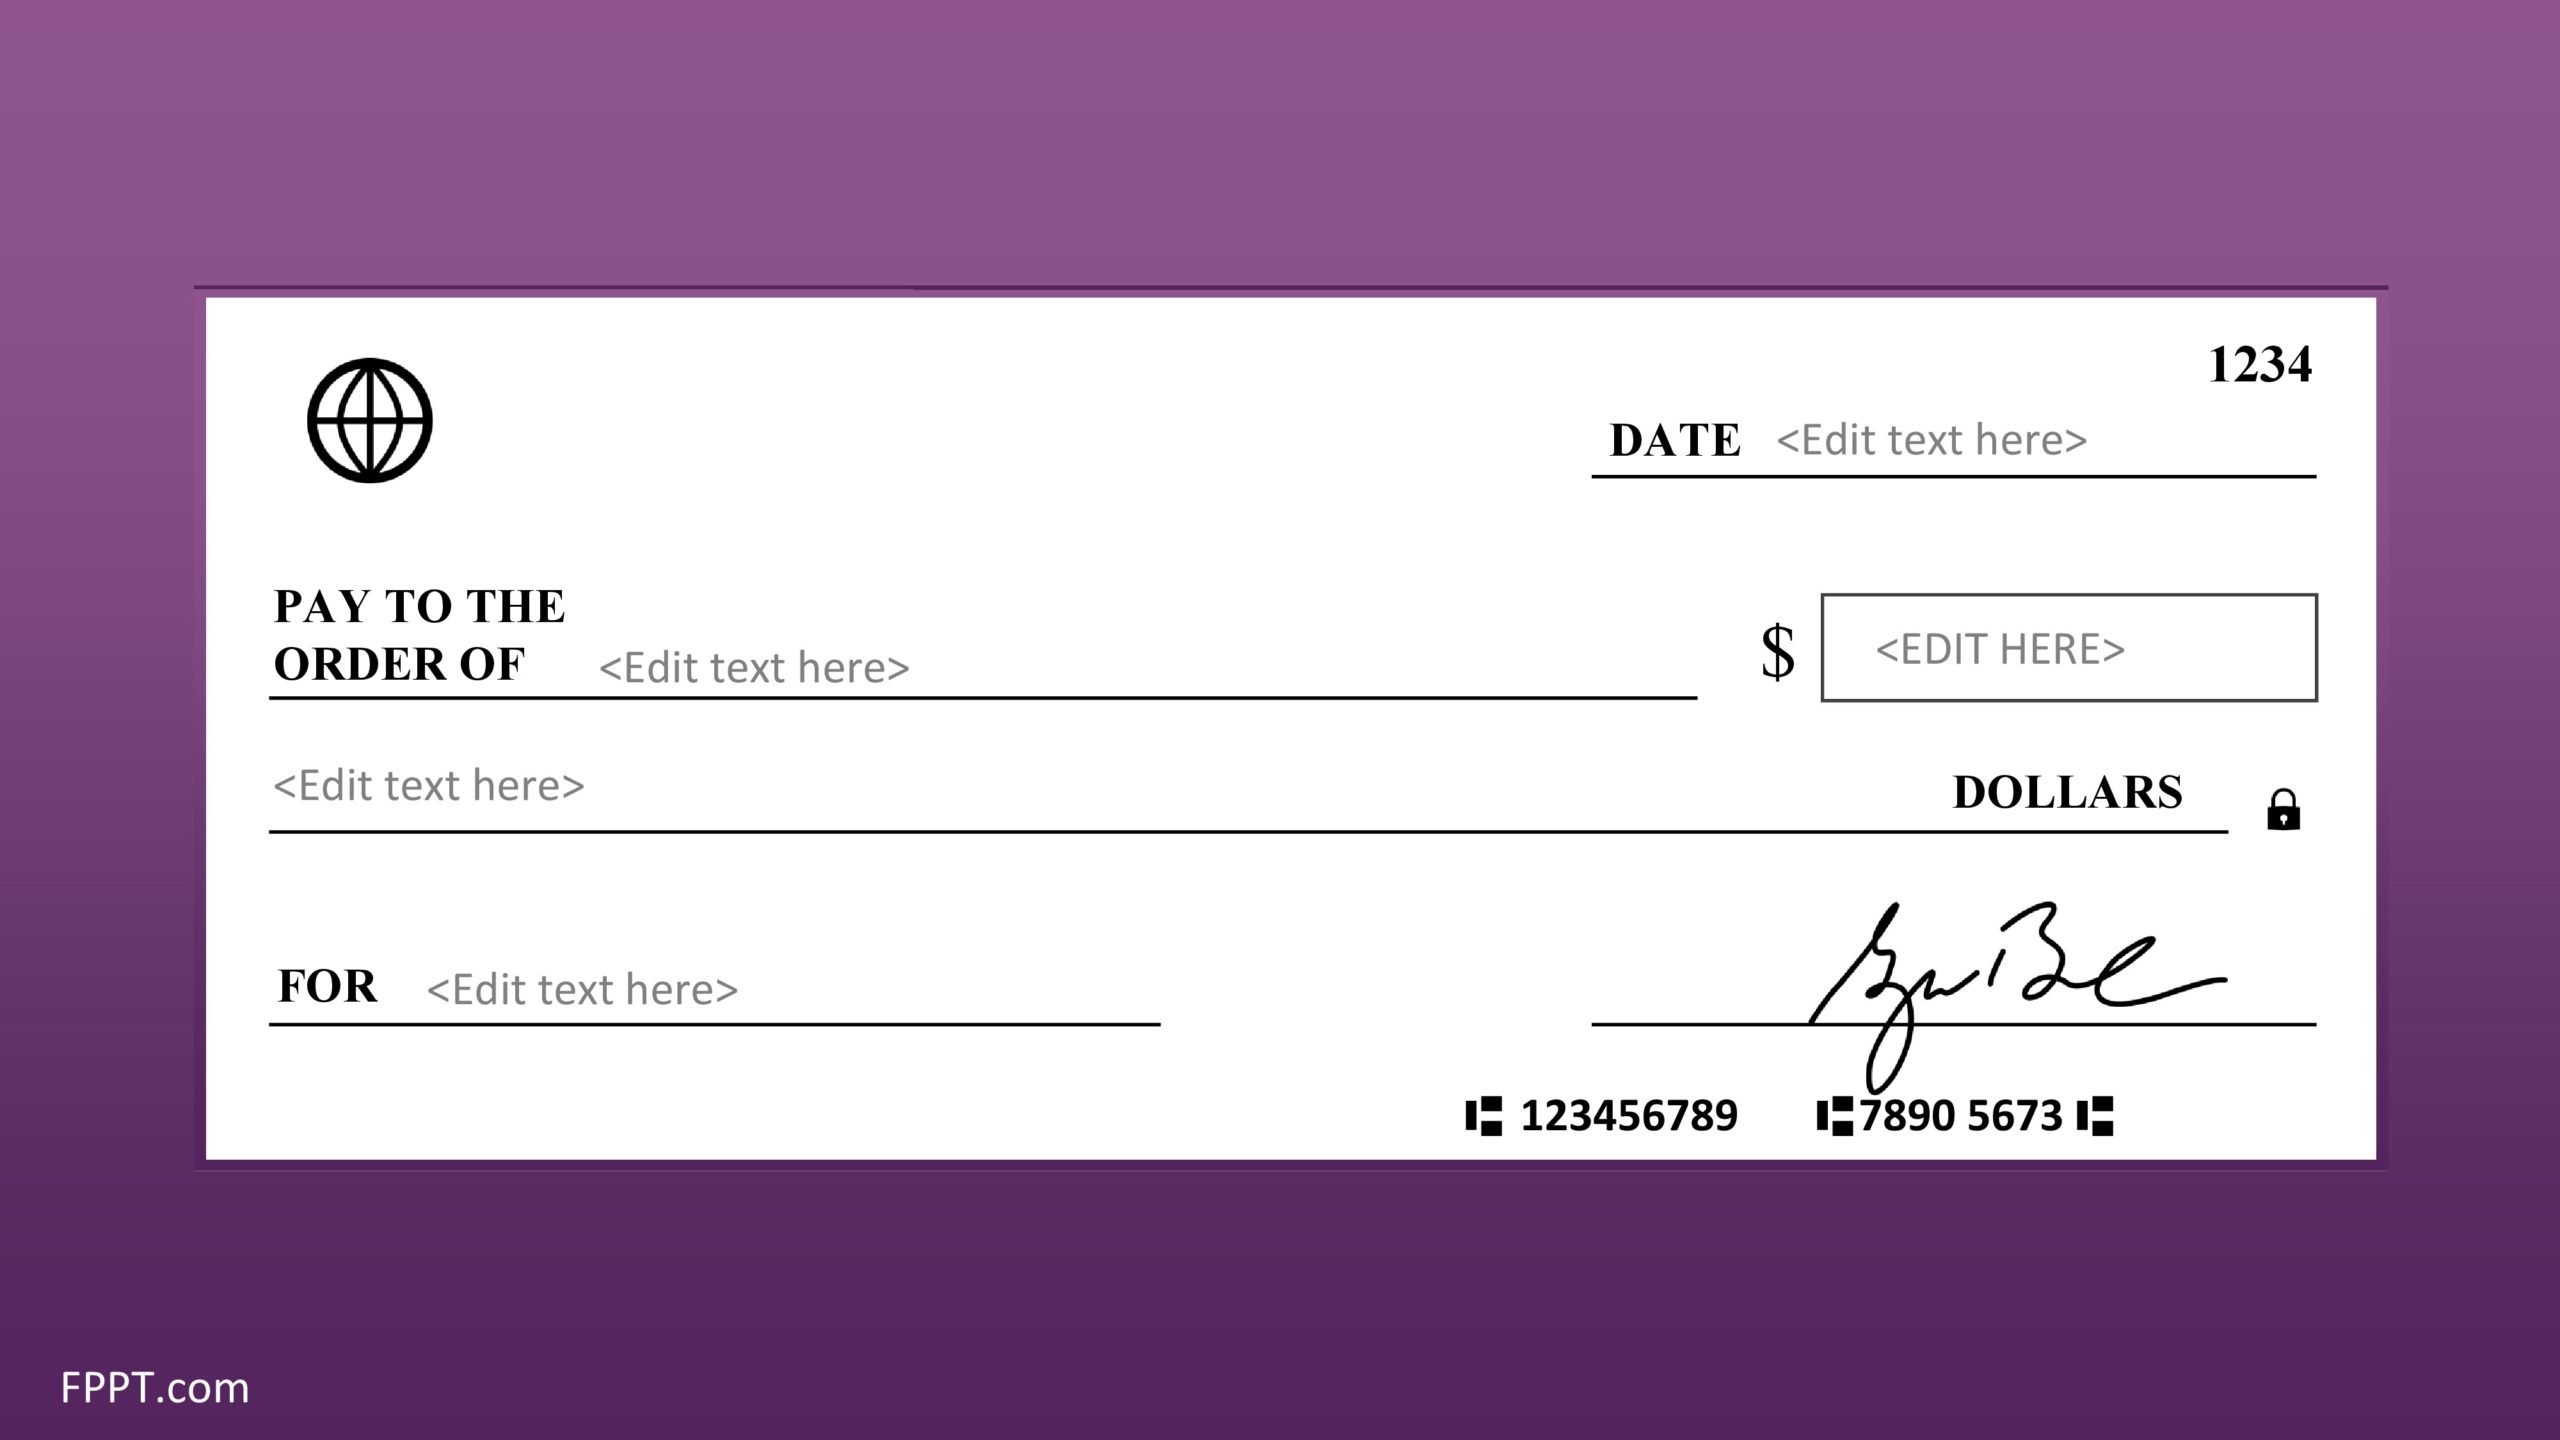 mock cheque template